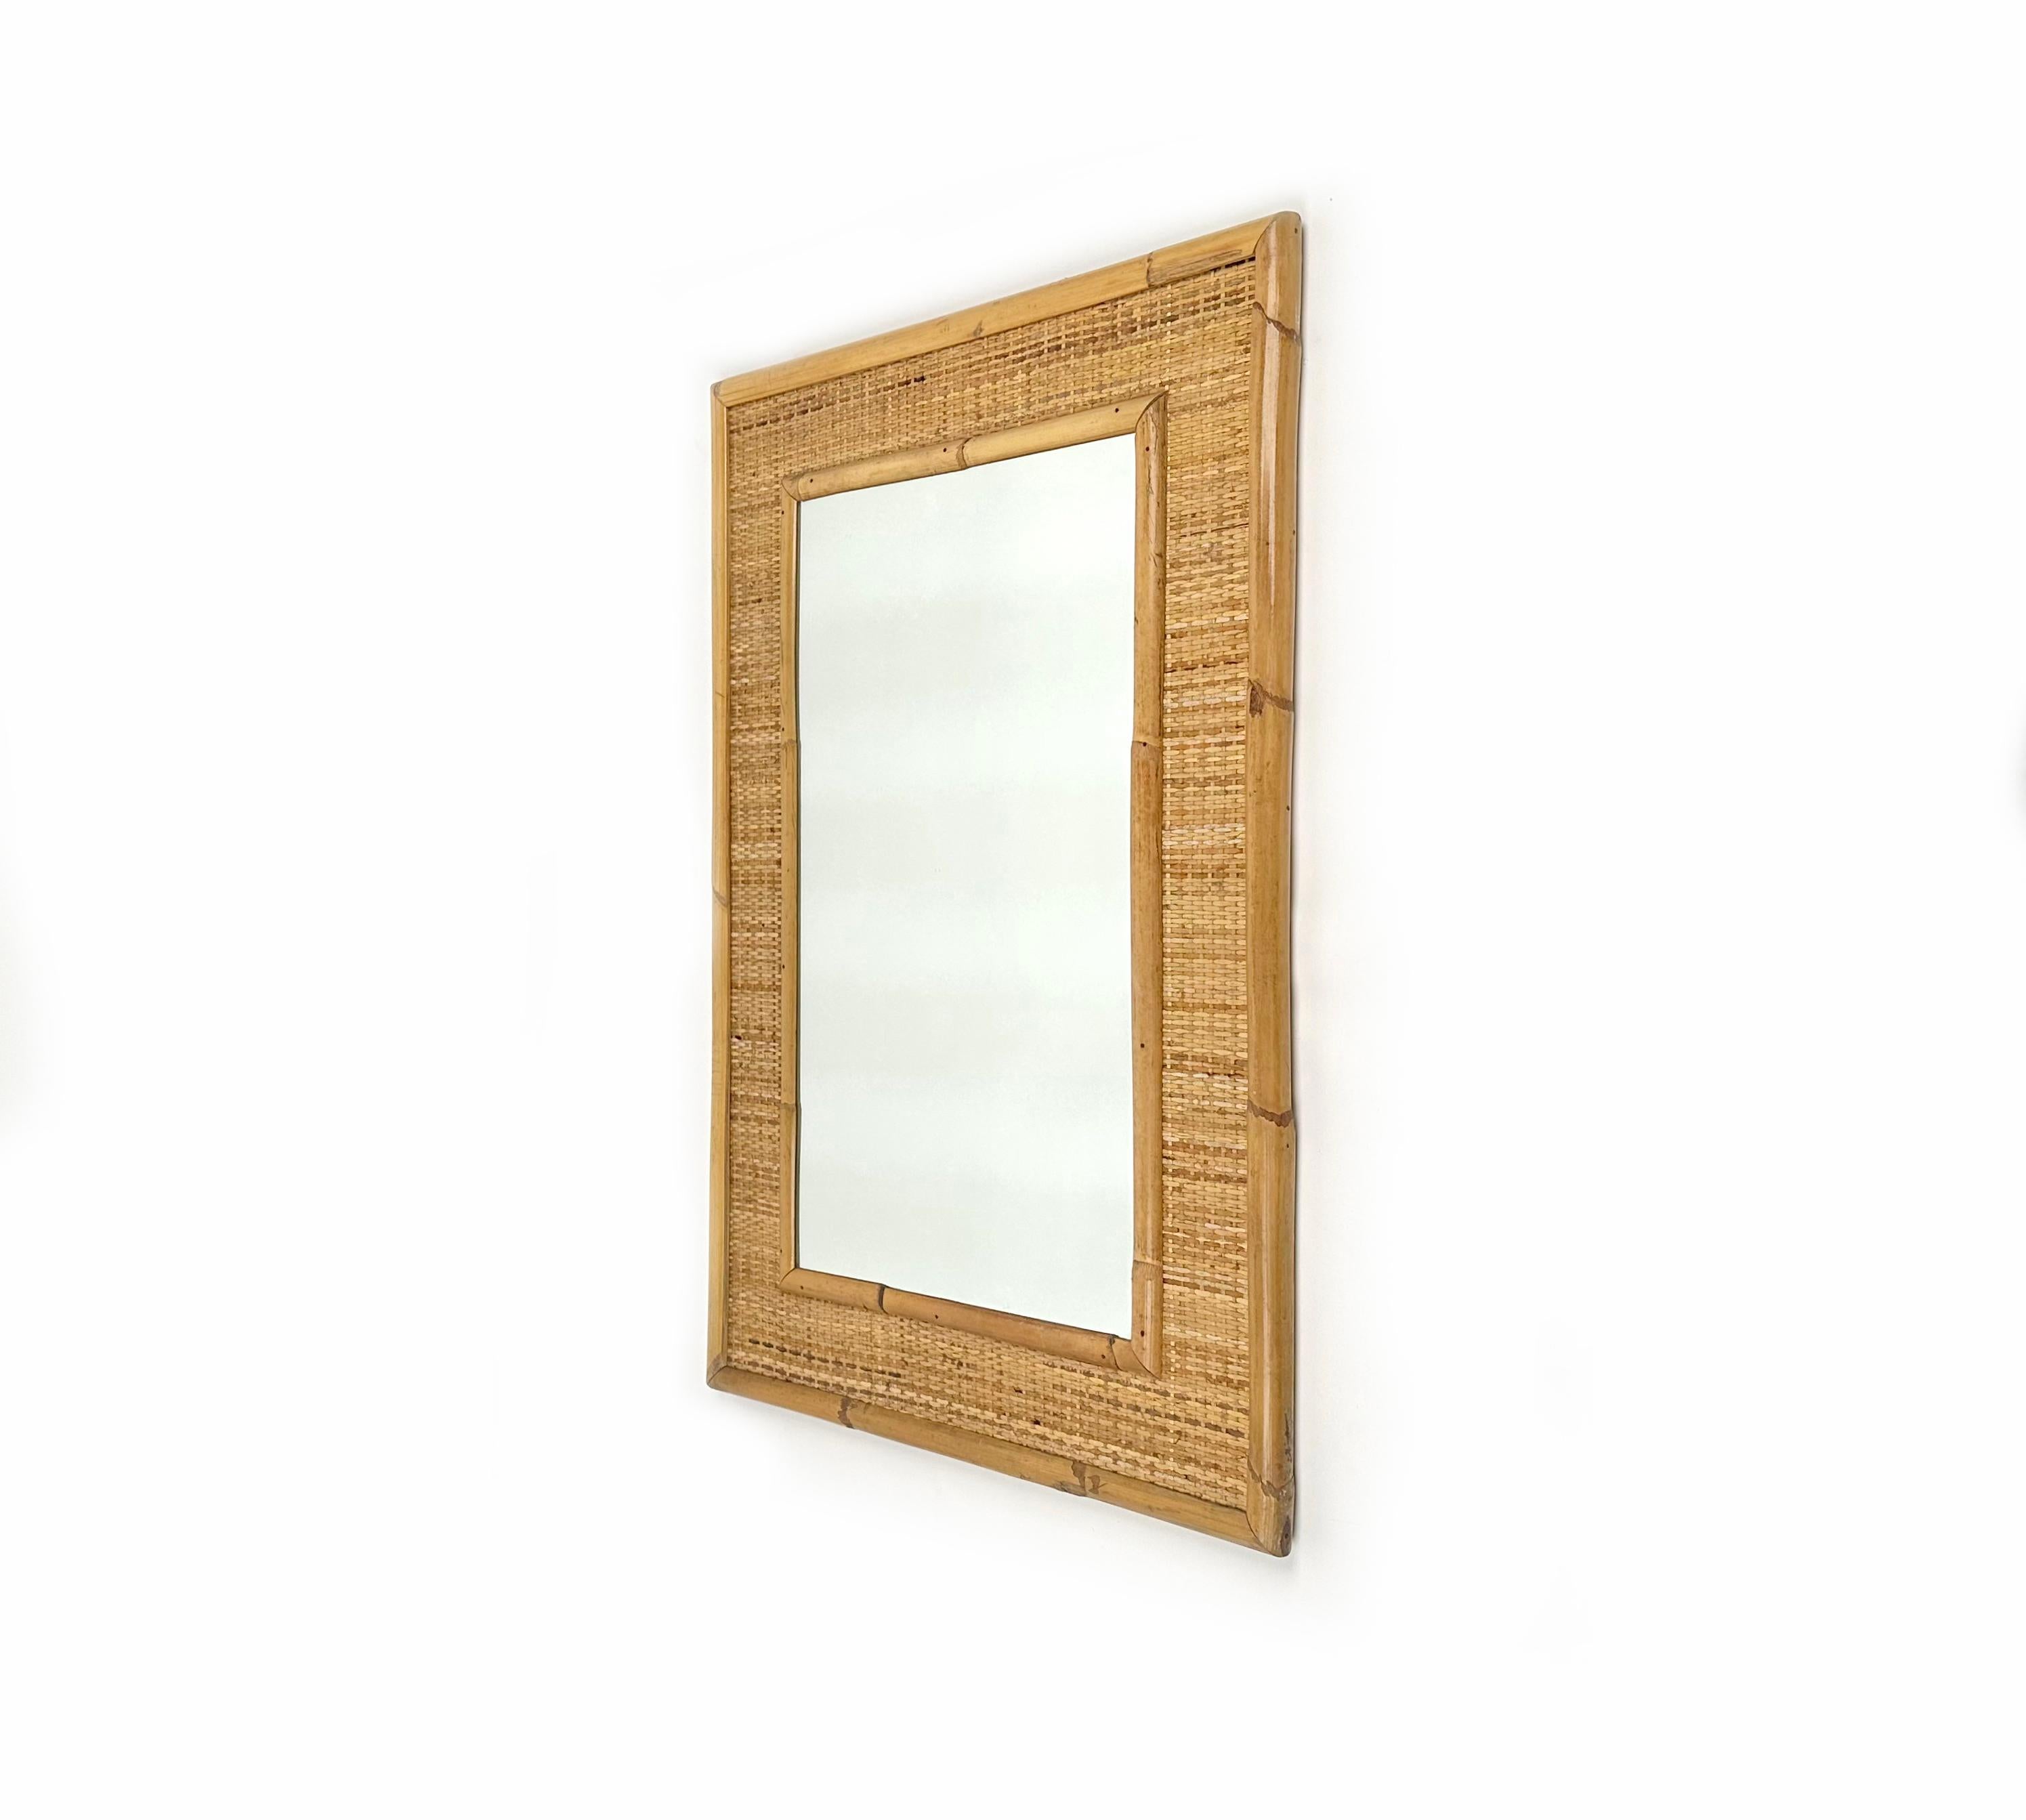 Midcentury Rectangular Bamboo and Rattan Wall Mirror, Italy 1960s In Good Condition For Sale In Rome, IT